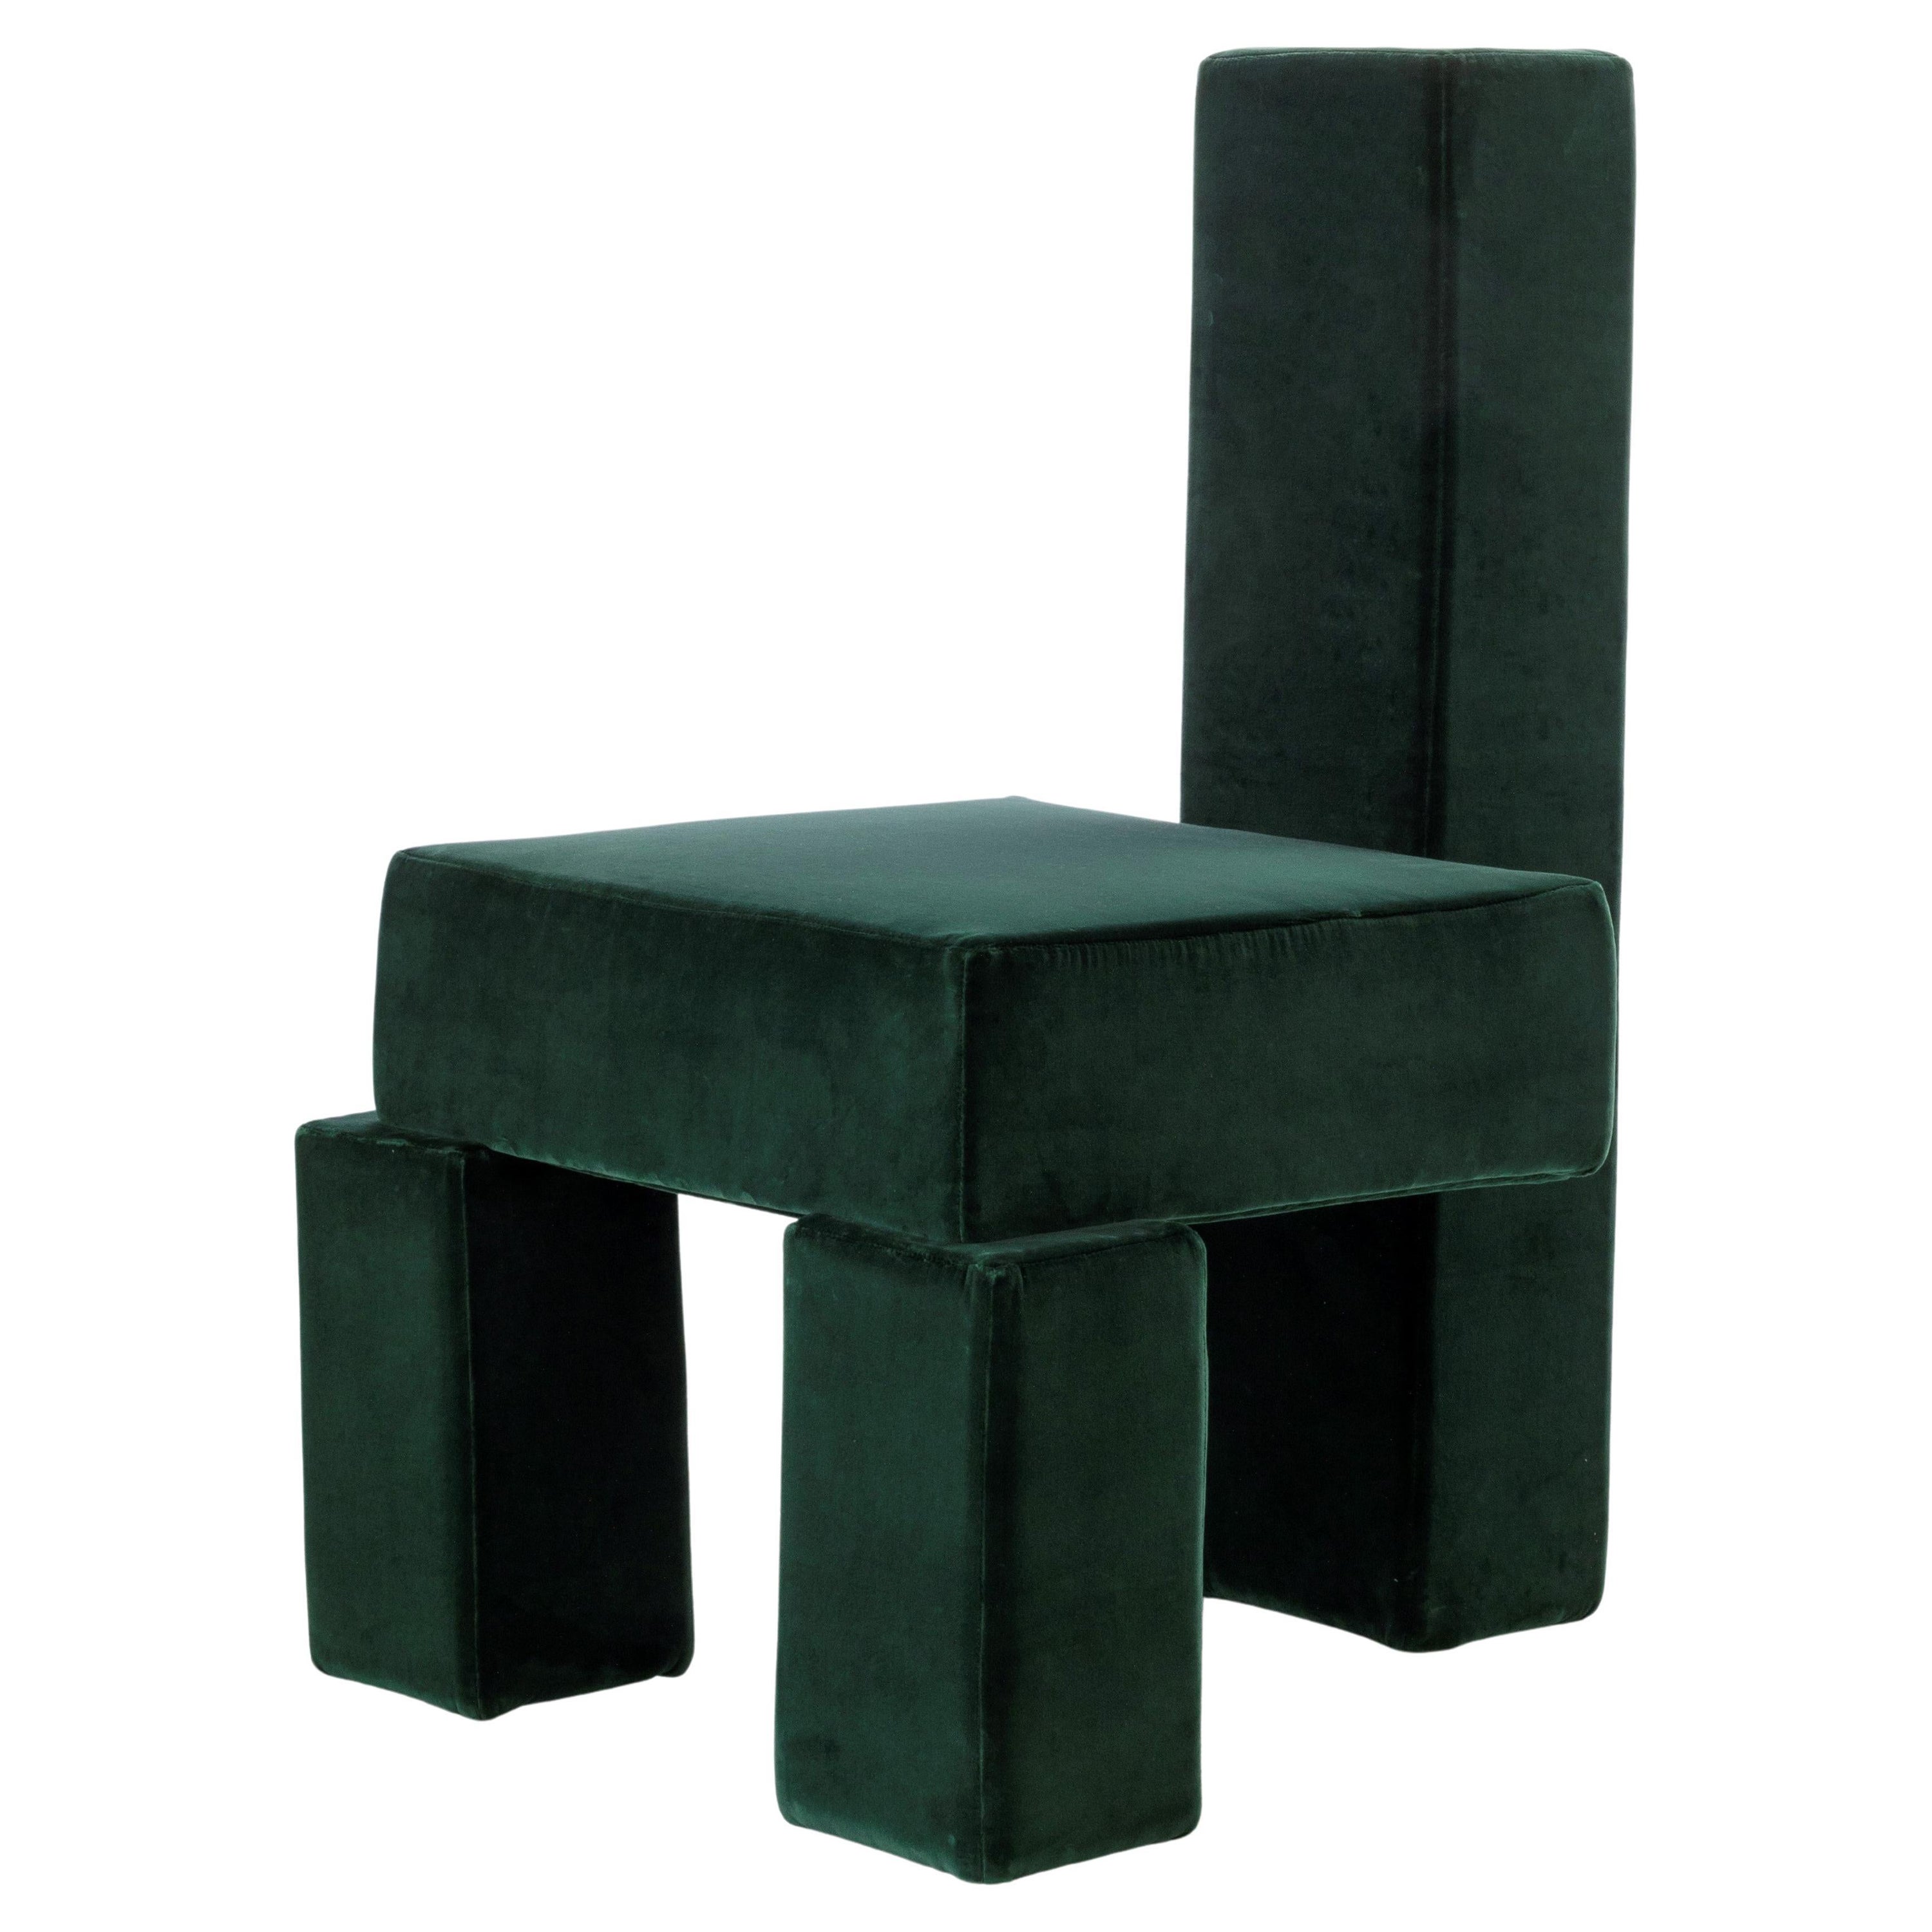 Licitra Chair by Pietro Franceschini For Sale